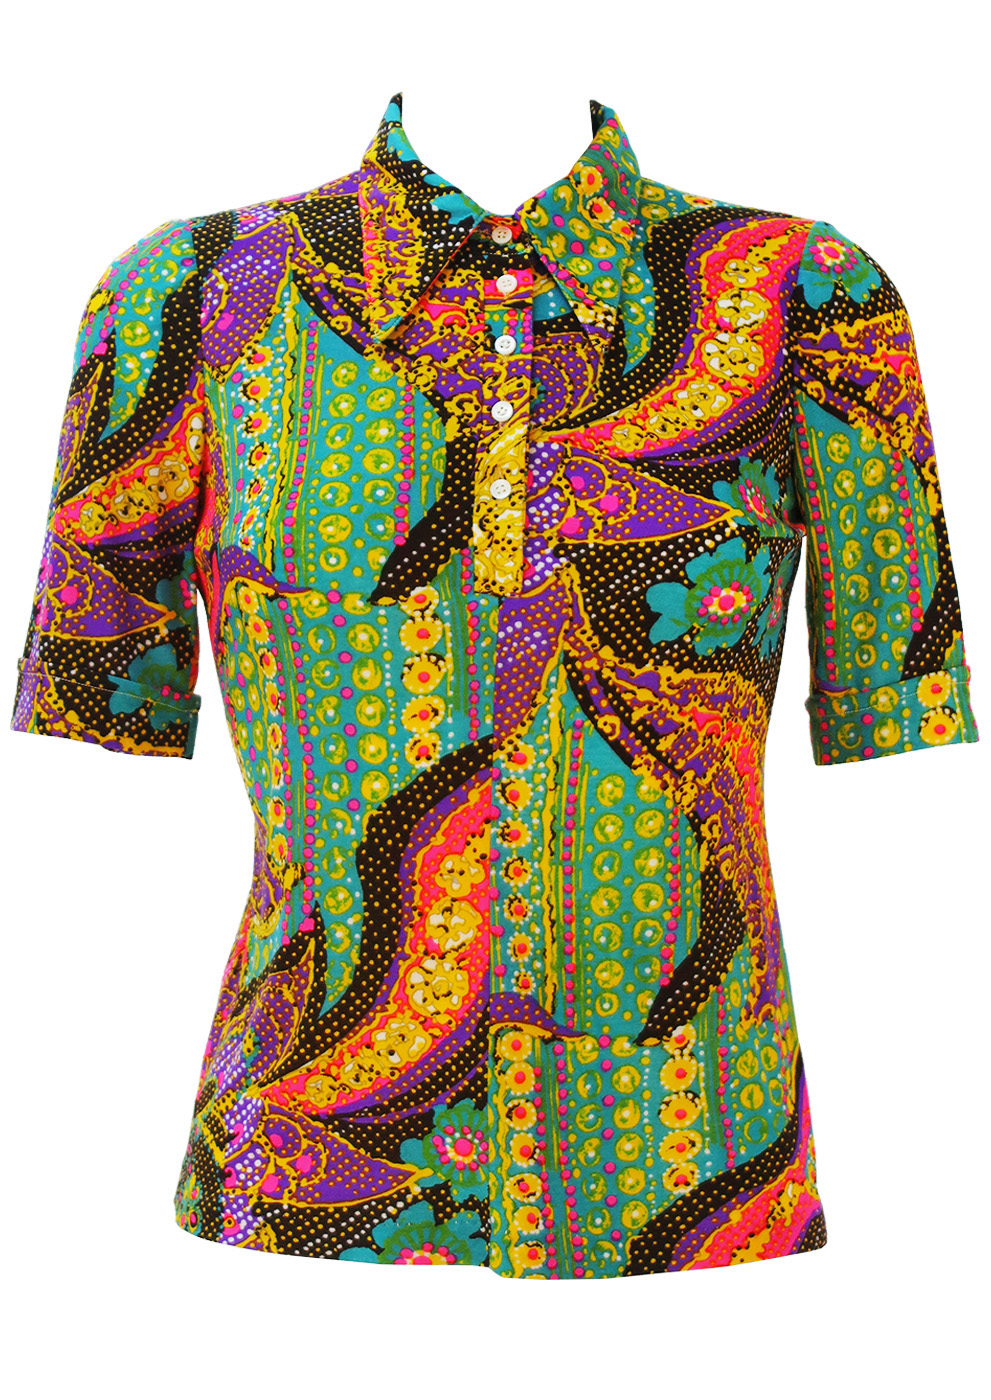 Vintage 60's Short Sleeve Top Shirt with Multicoloured Psychedelic ...